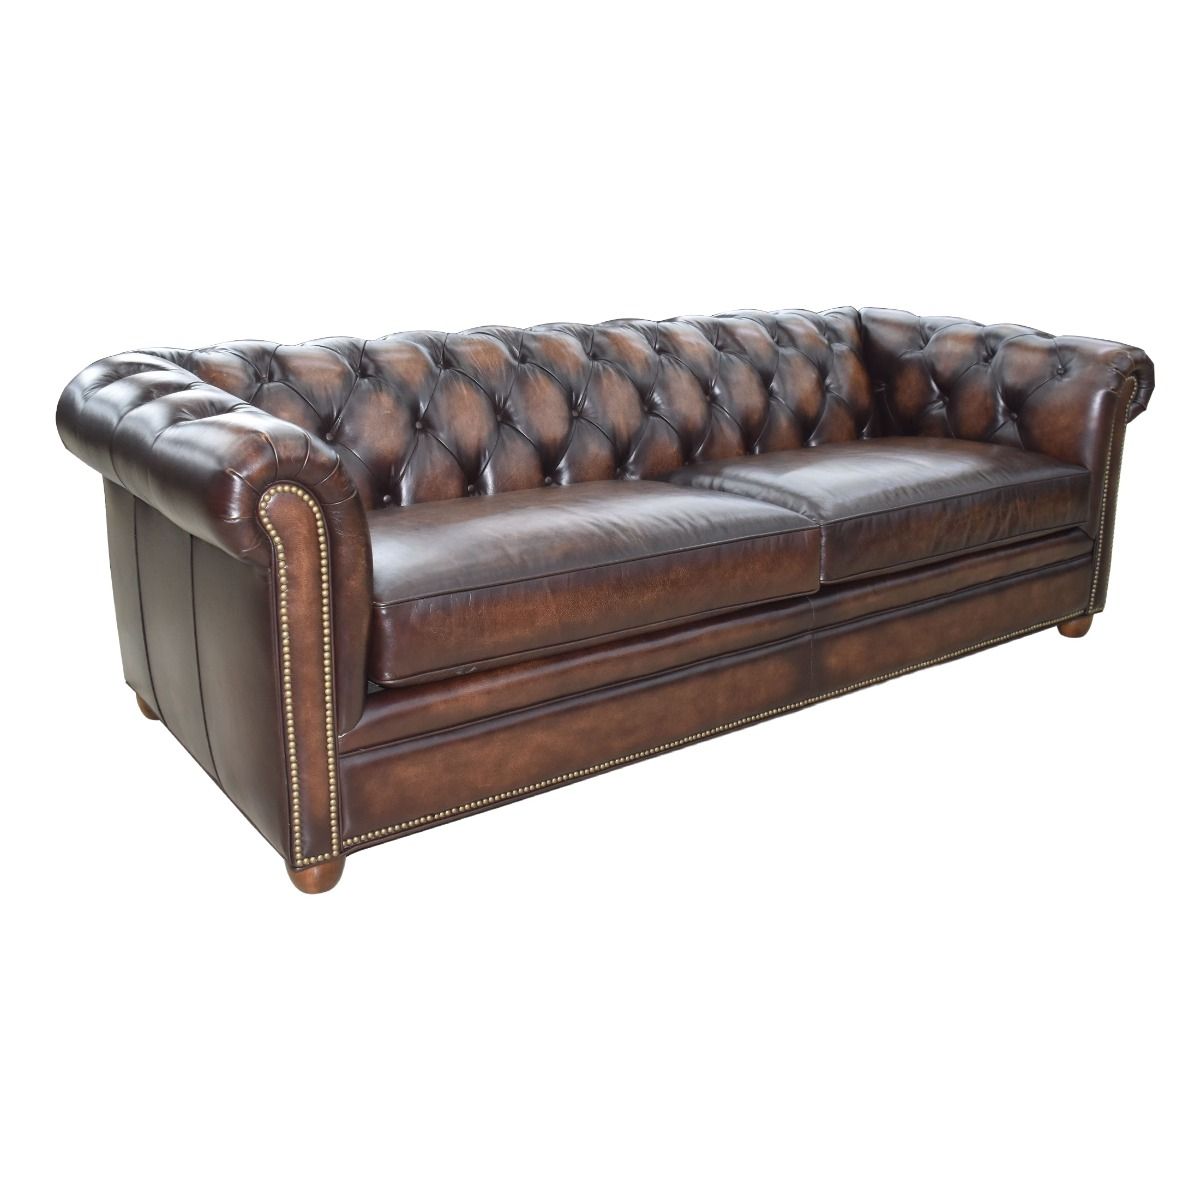 London Chesterfield 3 Seater